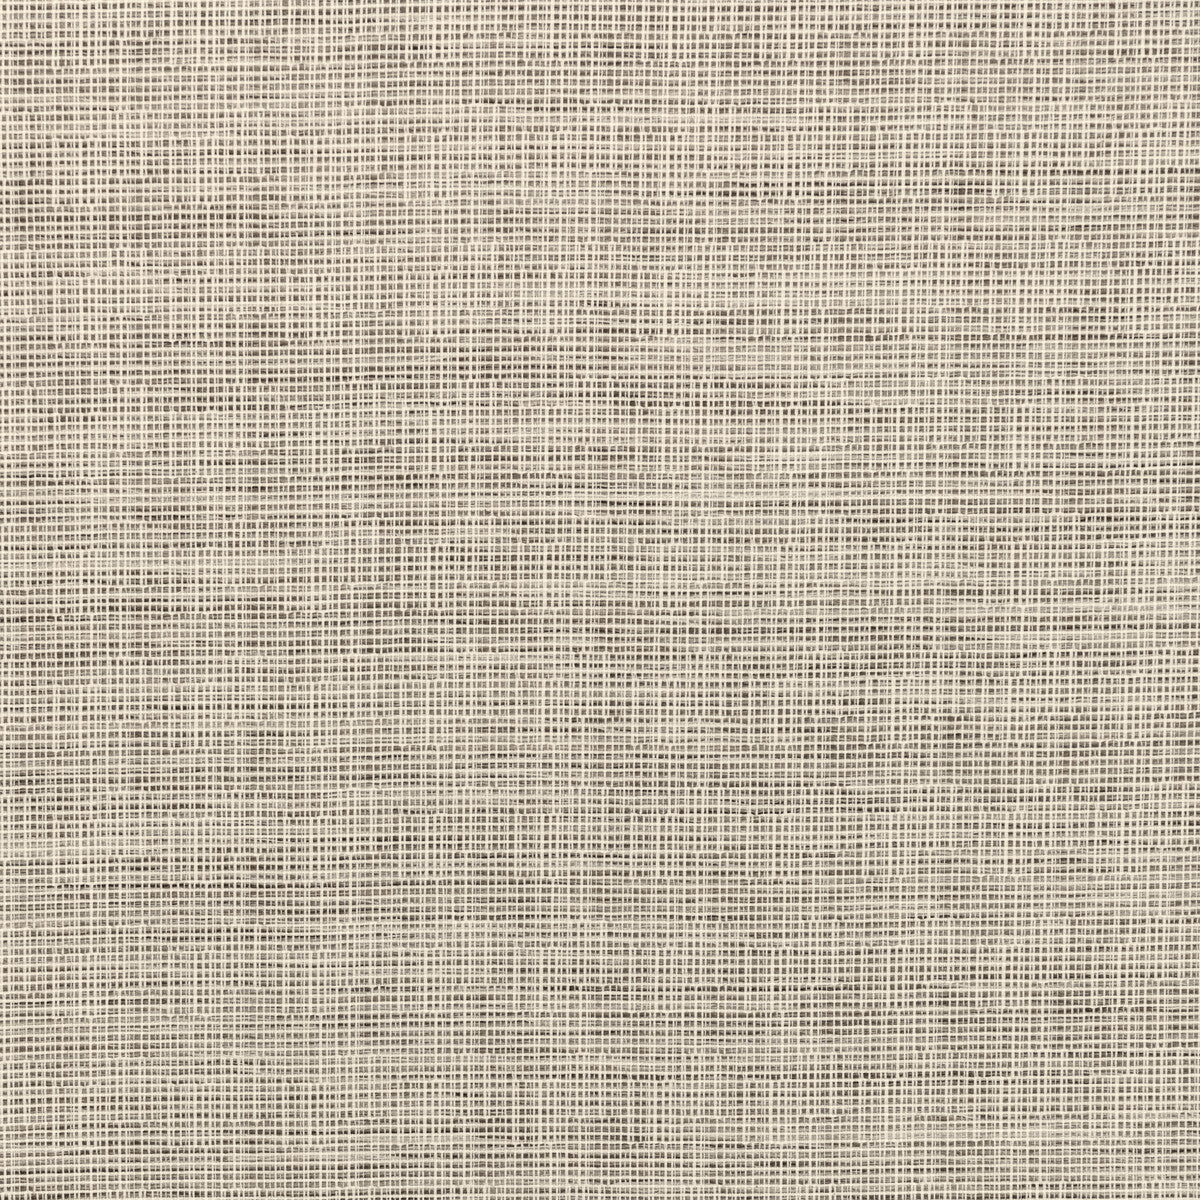 Kravet Smart fabric in 36303-11 color - pattern 36303.11.0 - by Kravet Smart in the Performance Crypton Home collection